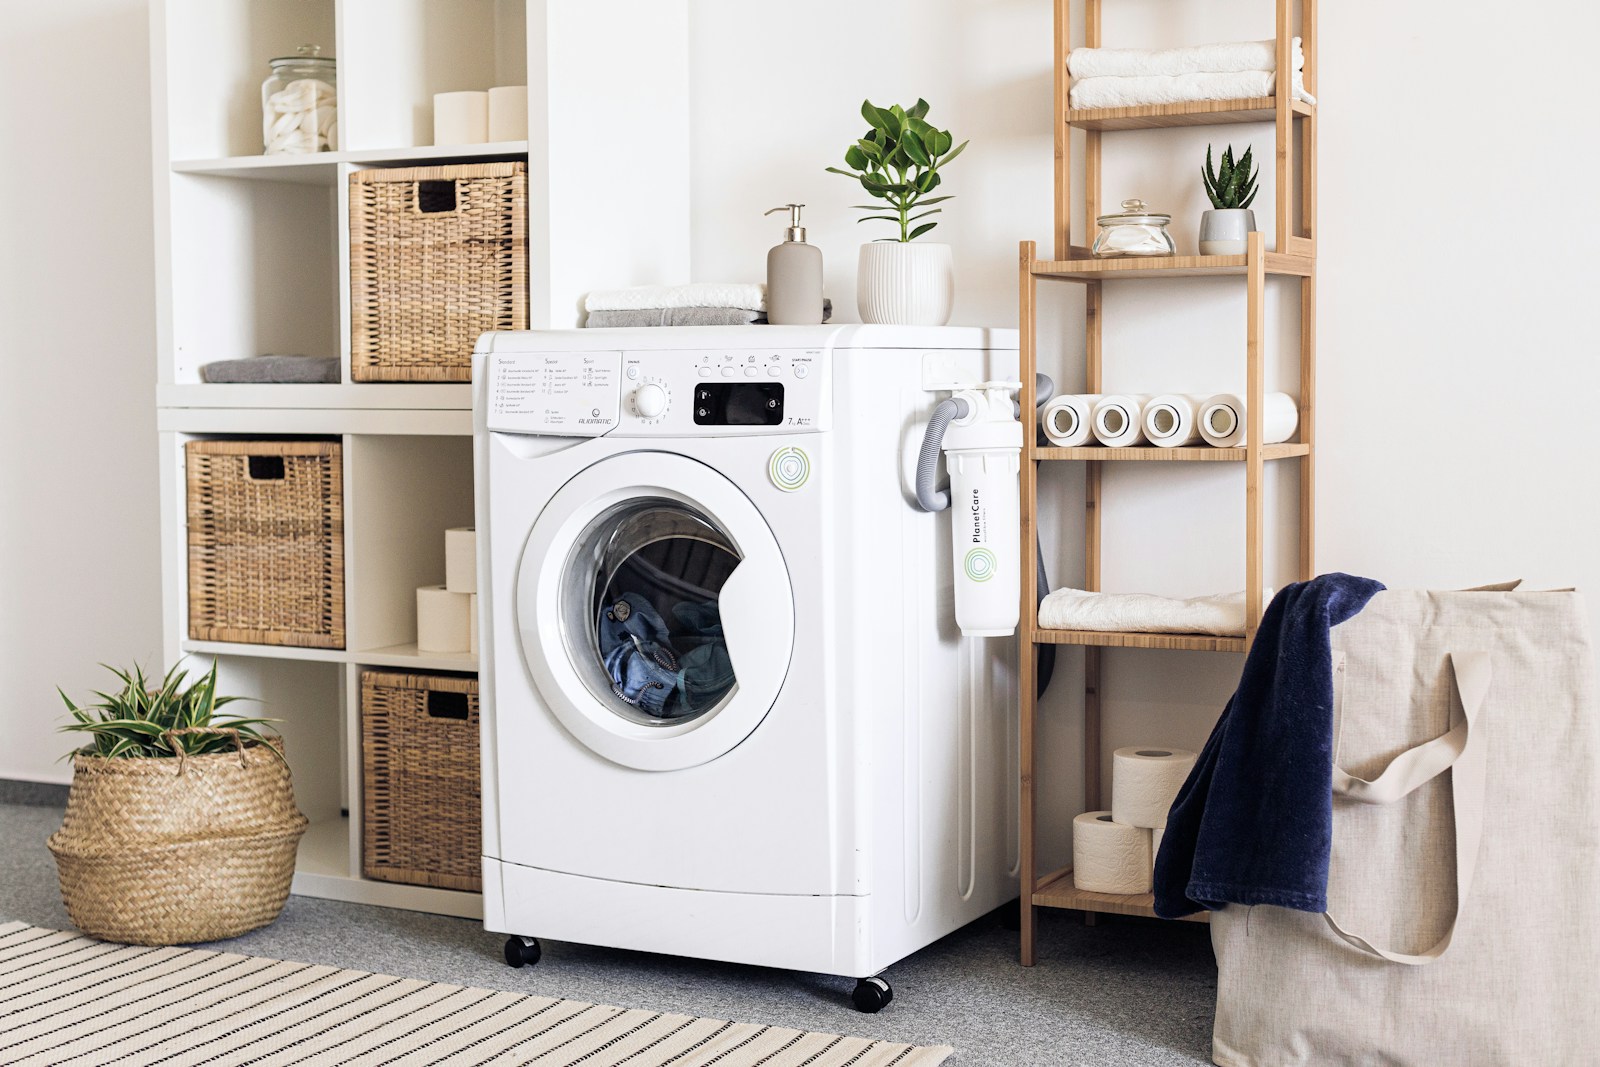 Does Your Laundry Room Smell Like Sewage? Here’s What to Do About It